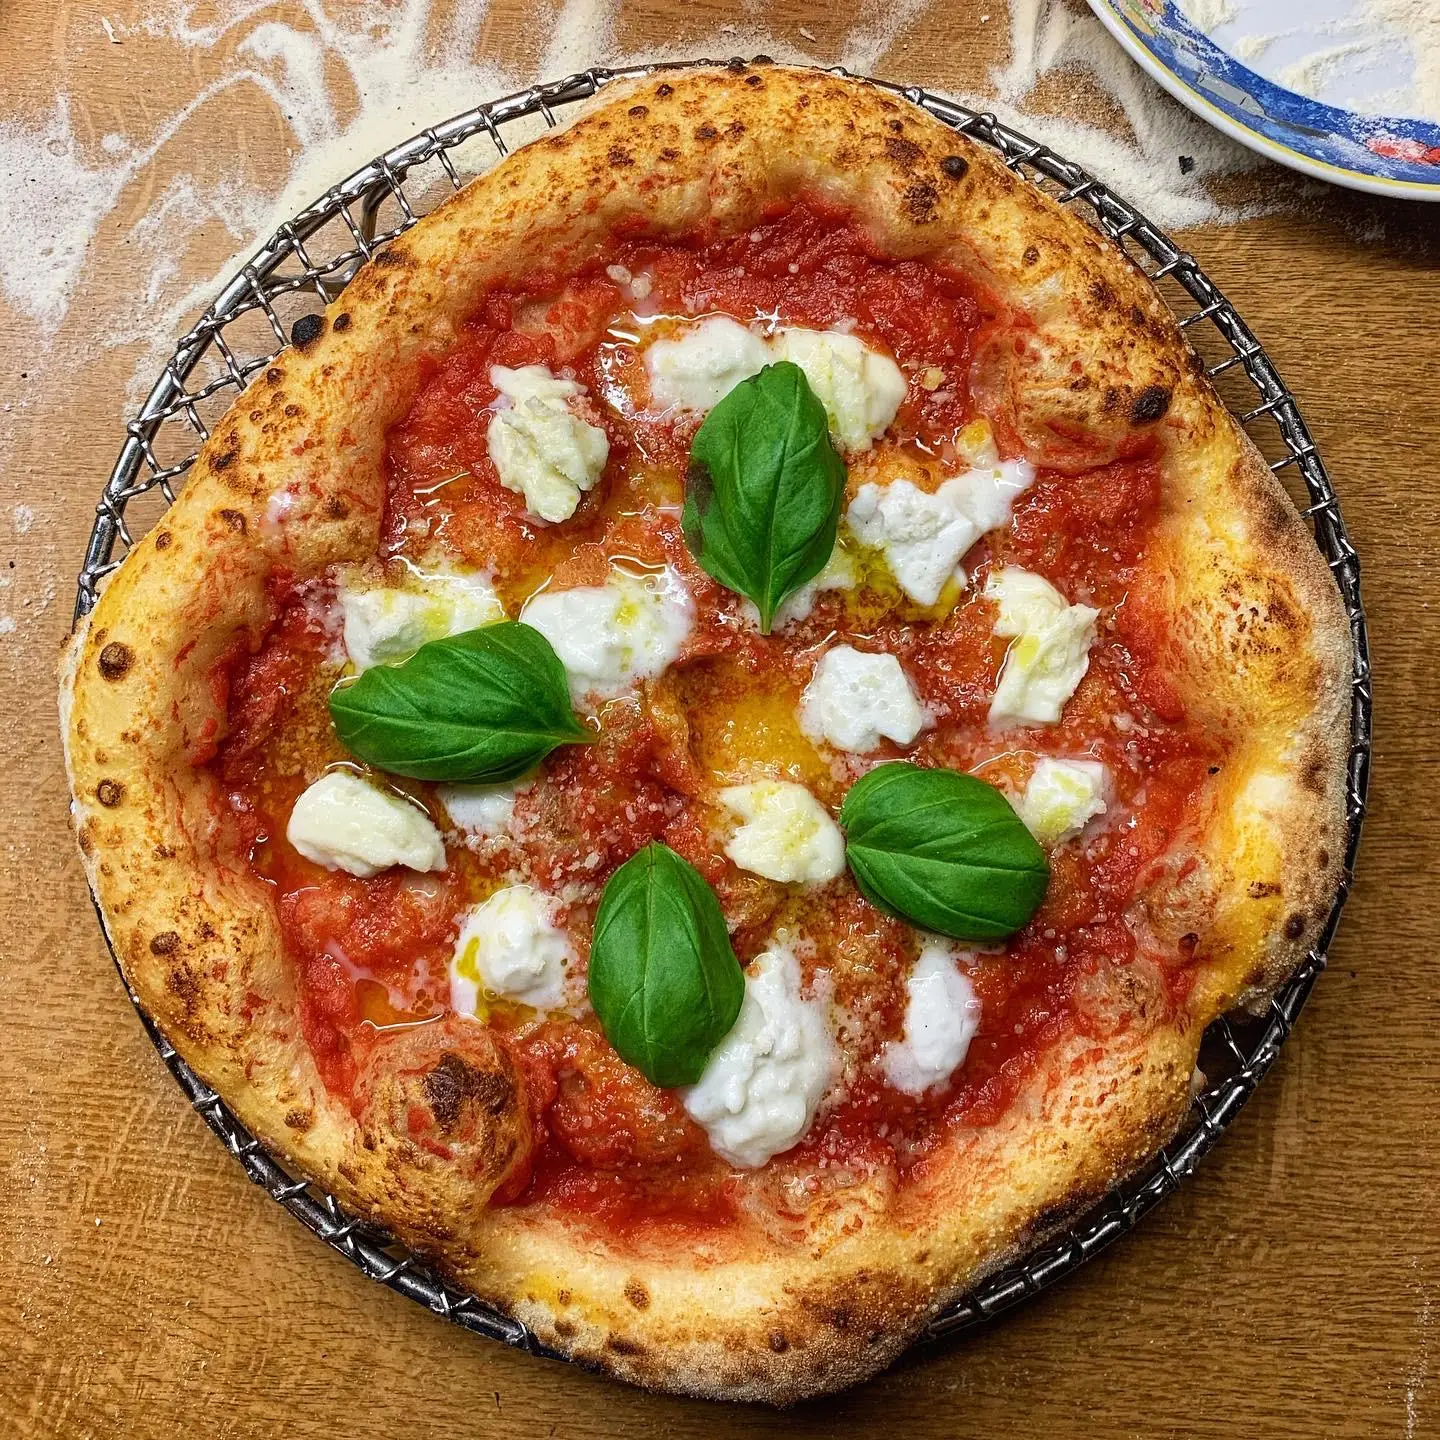 Neapolitan Pizza from above